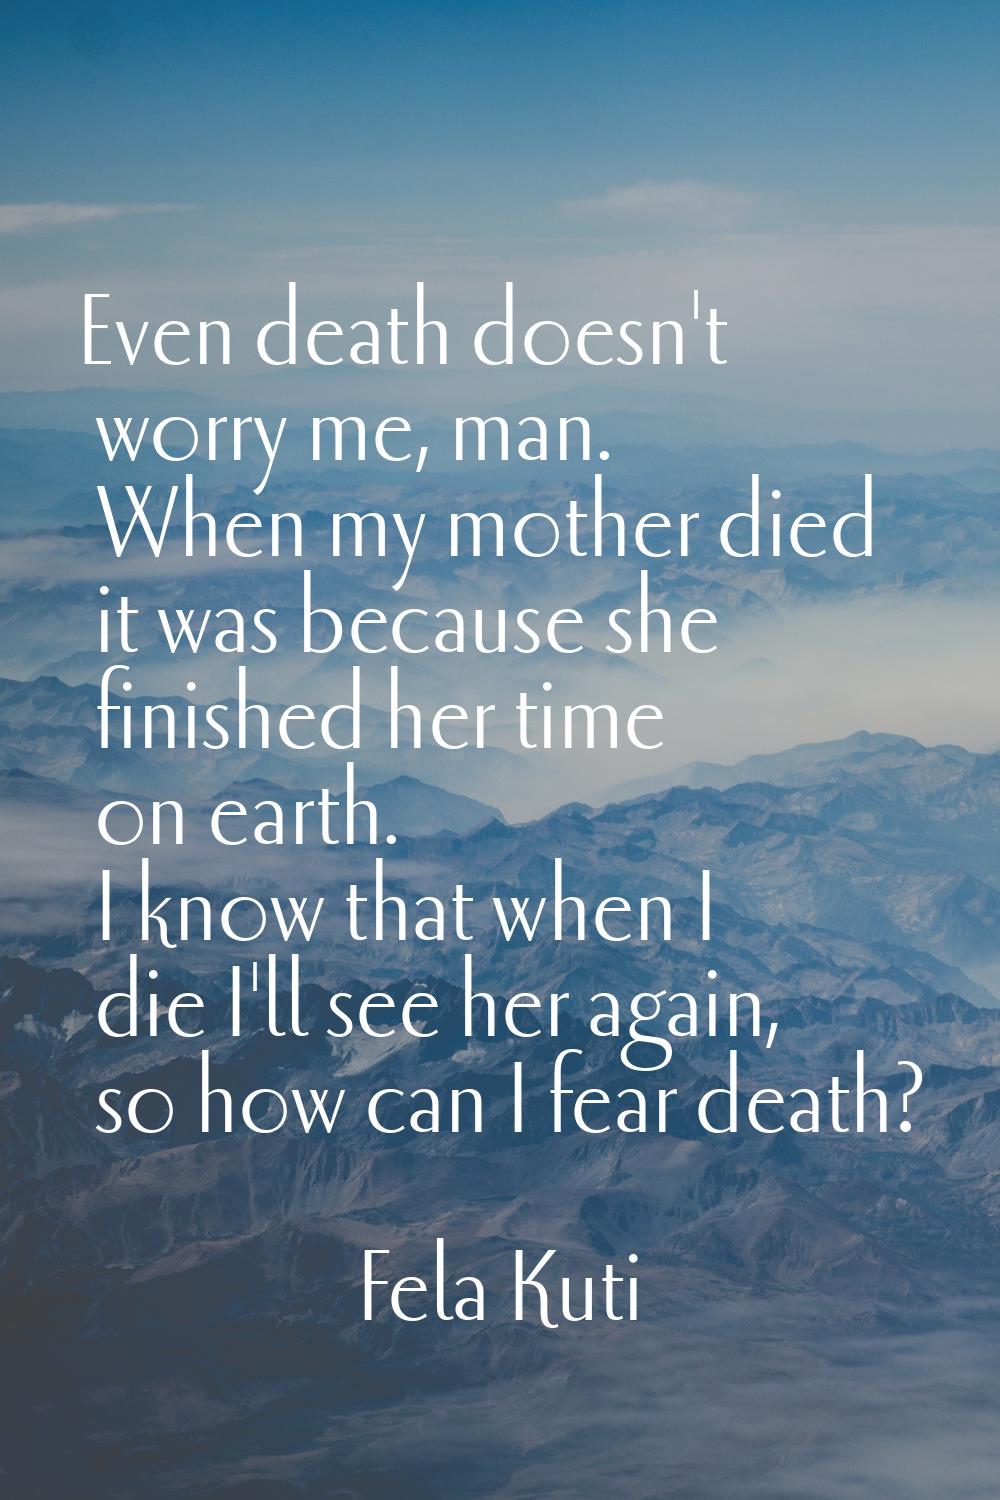 Even death doesn't worry me, man. When my mother died it was because she finished her time on earth